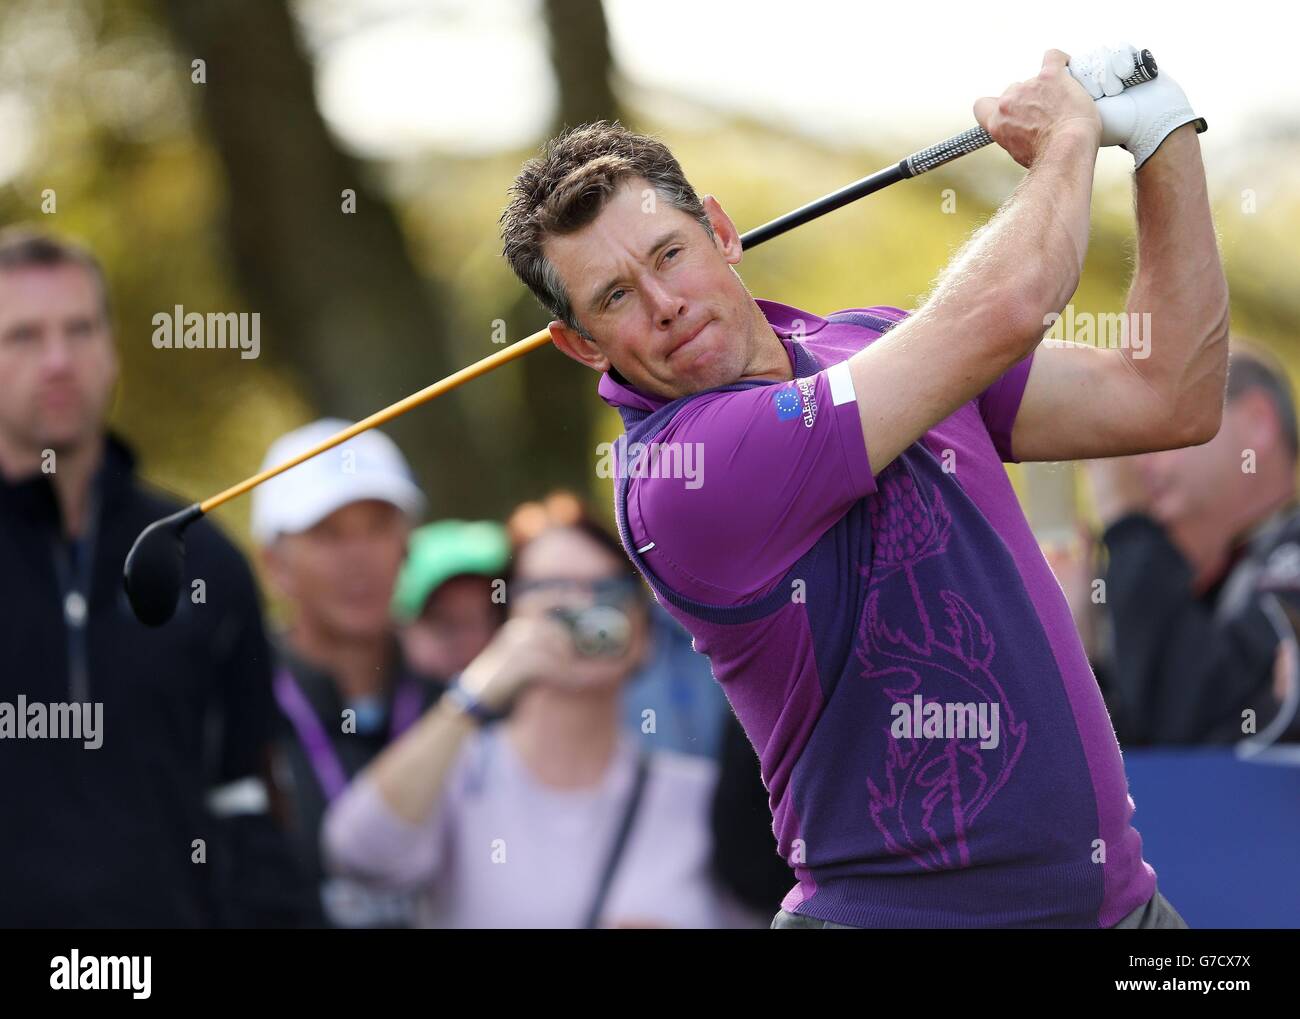 Europe's Lee Westwood during a practice session at Gleneagles Golf Course, Perthshire. Stock Photo